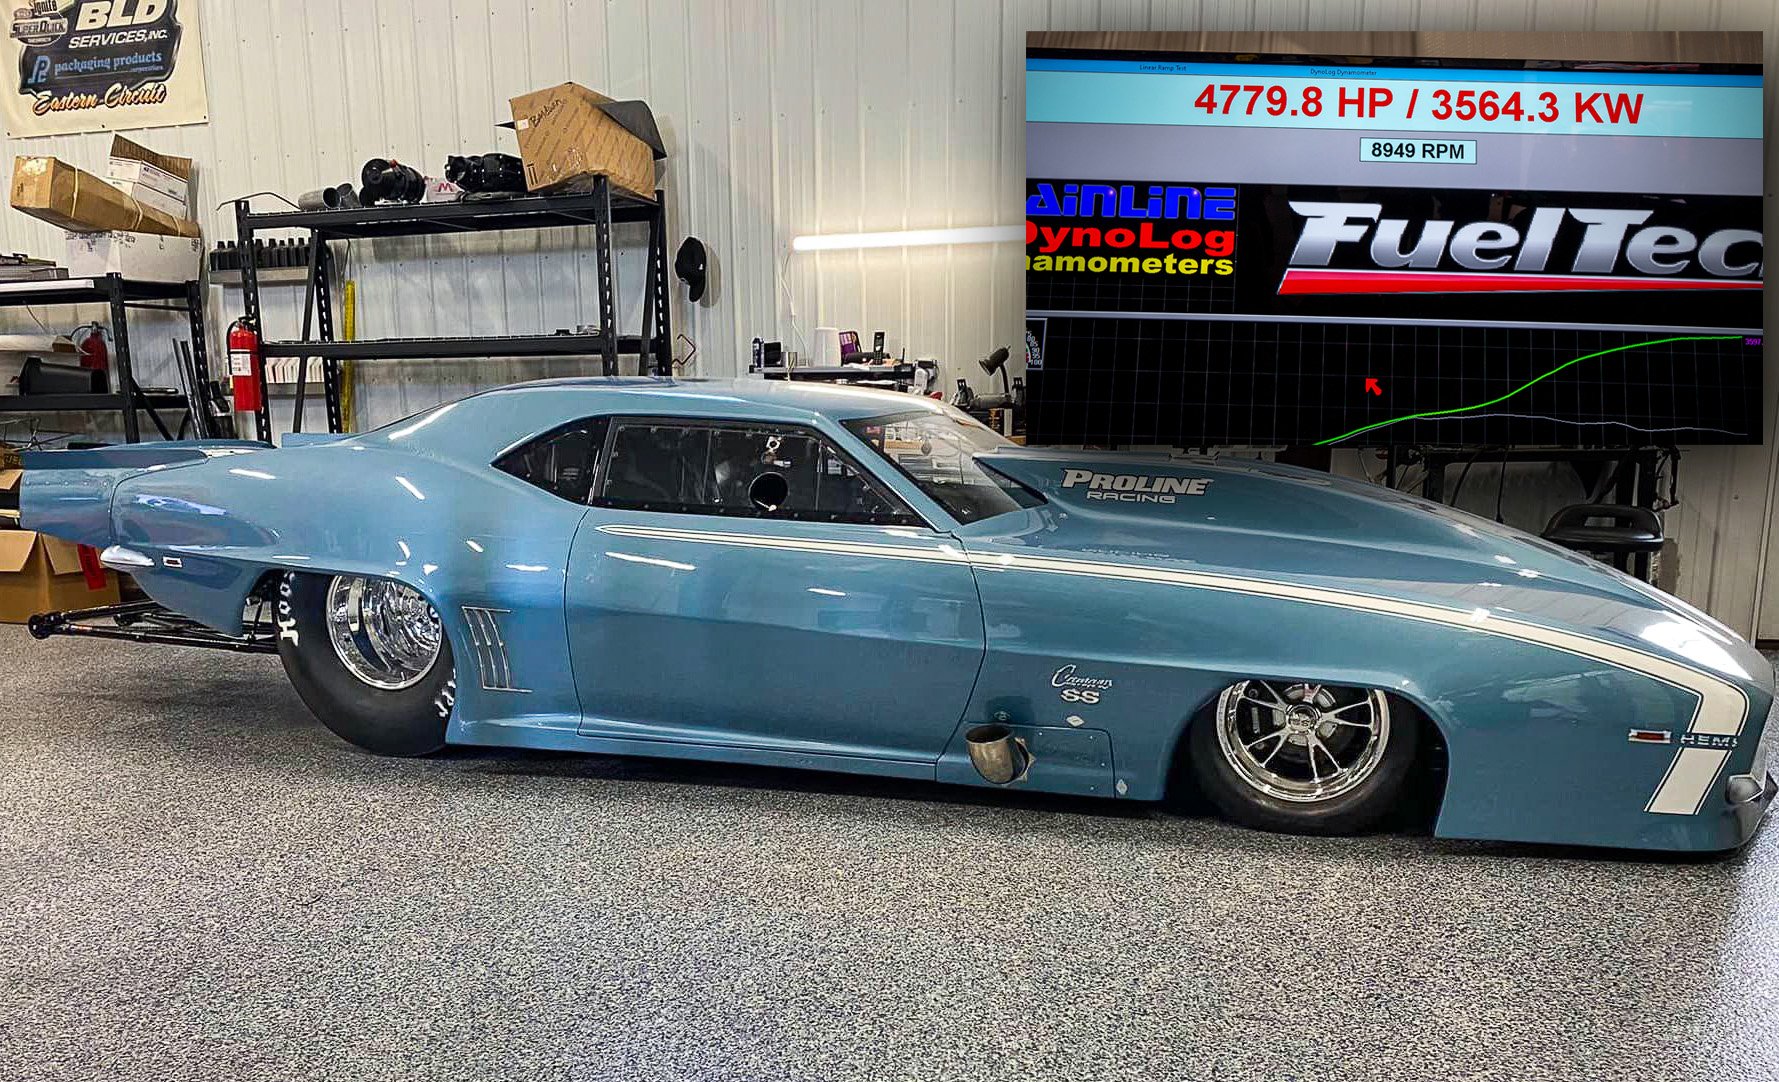 Mark Micke’s New Pro Mod Belts Out 4,779 HP On FuelTech’s Dyno